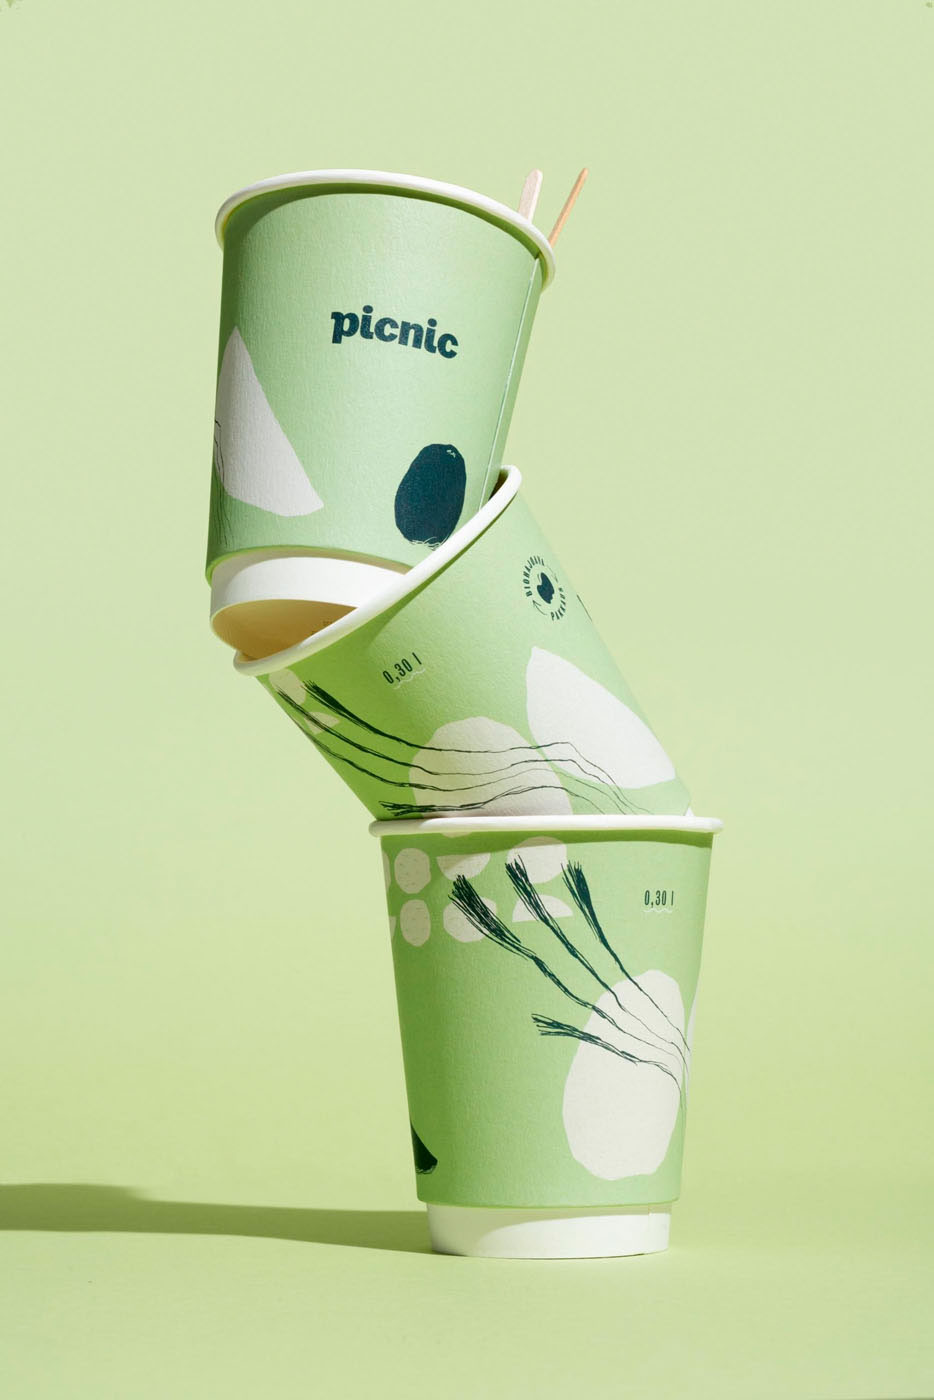 Picnic three cups with minimalistic illustrations placed on each other on a light green background by Tomas Olsen